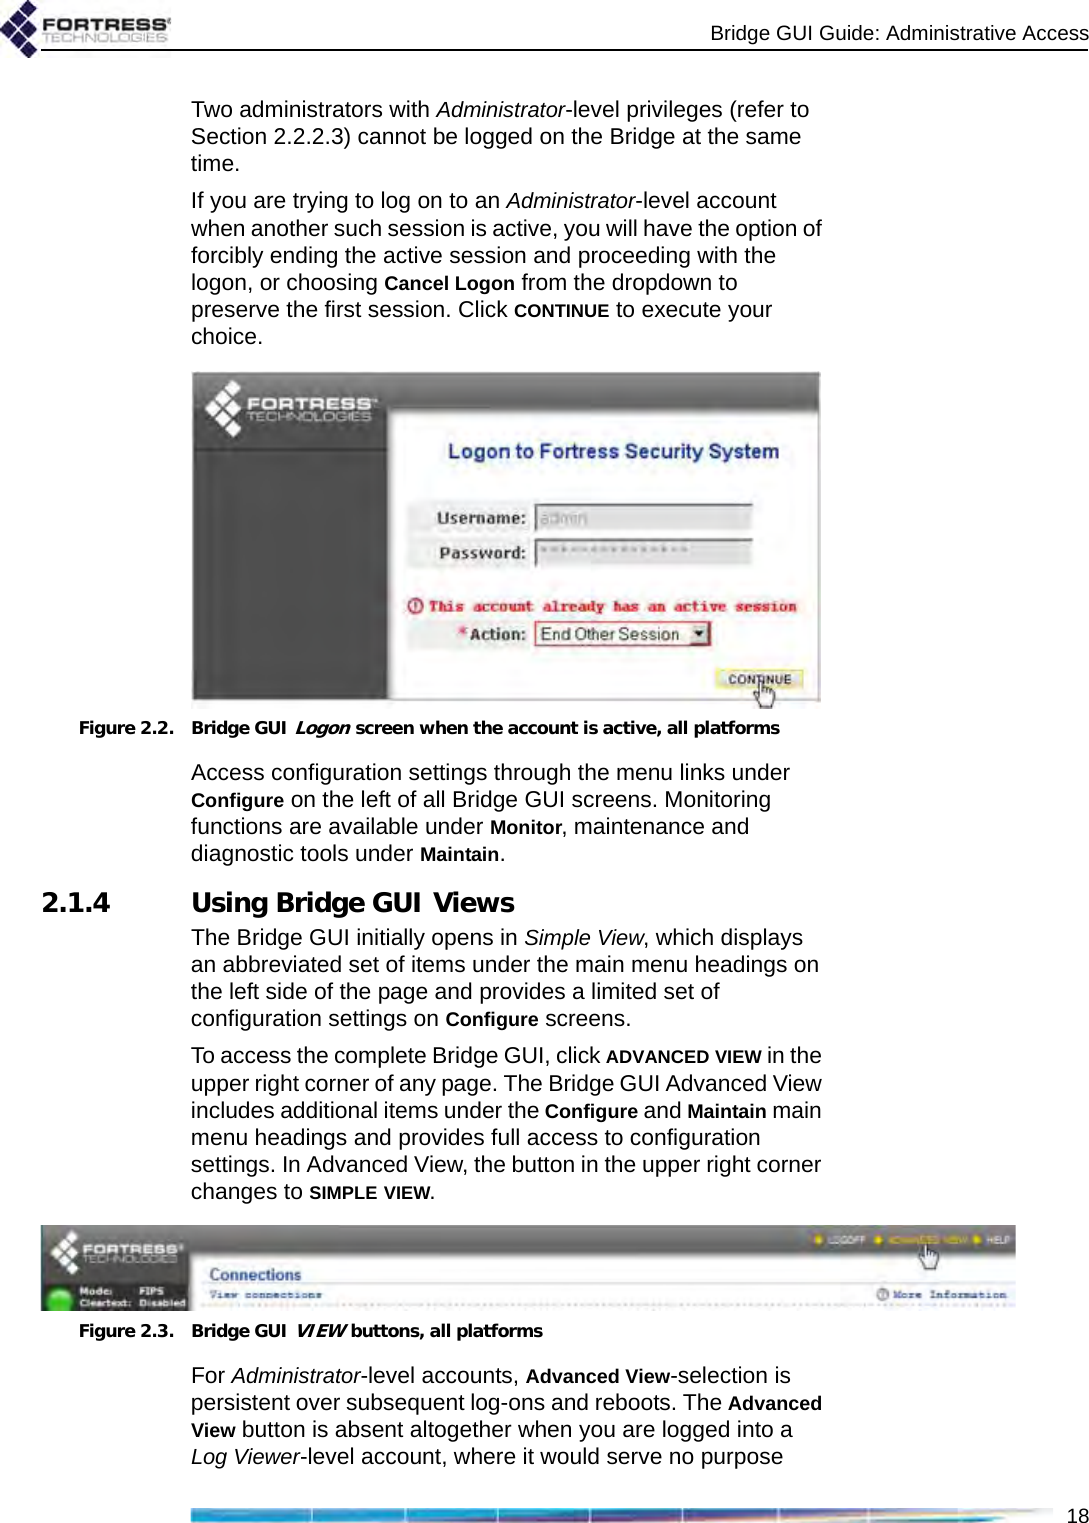 Bridge GUI Guide: Administrative Access18Two administrators with Administrator-level privileges (refer to Section 2.2.2.3) cannot be logged on the Bridge at the same time.If you are trying to log on to an Administrator-level account when another such session is active, you will have the option of forcibly ending the active session and proceeding with the logon, or choosing Cancel Logon from the dropdown to preserve the first session. Click CONTINUE to execute your choice.Figure 2.2. Bridge GUI Logon screen when the account is active, all platformsAccess configuration settings through the menu links under Configure on the left of all Bridge GUI screens. Monitoring functions are available under Monitor, maintenance and diagnostic tools under Maintain.2.1.4 Using Bridge GUI ViewsThe Bridge GUI initially opens in Simple View, which displays an abbreviated set of items under the main menu headings on the left side of the page and provides a limited set of configuration settings on Configure screens. To access the complete Bridge GUI, click ADVANCED VIEW in the upper right corner of any page. The Bridge GUI Advanced View includes additional items under the Configure and Maintain main menu headings and provides full access to configuration settings. In Advanced View, the button in the upper right corner changes to SIMPLE VIEW.Figure 2.3. Bridge GUI VIEW buttons, all platformsFor Administrator-level accounts, Advanced View-selection is persistent over subsequent log-ons and reboots. The Advanced View button is absent altogether when you are logged into a Log Viewer-level account, where it would serve no purpose 